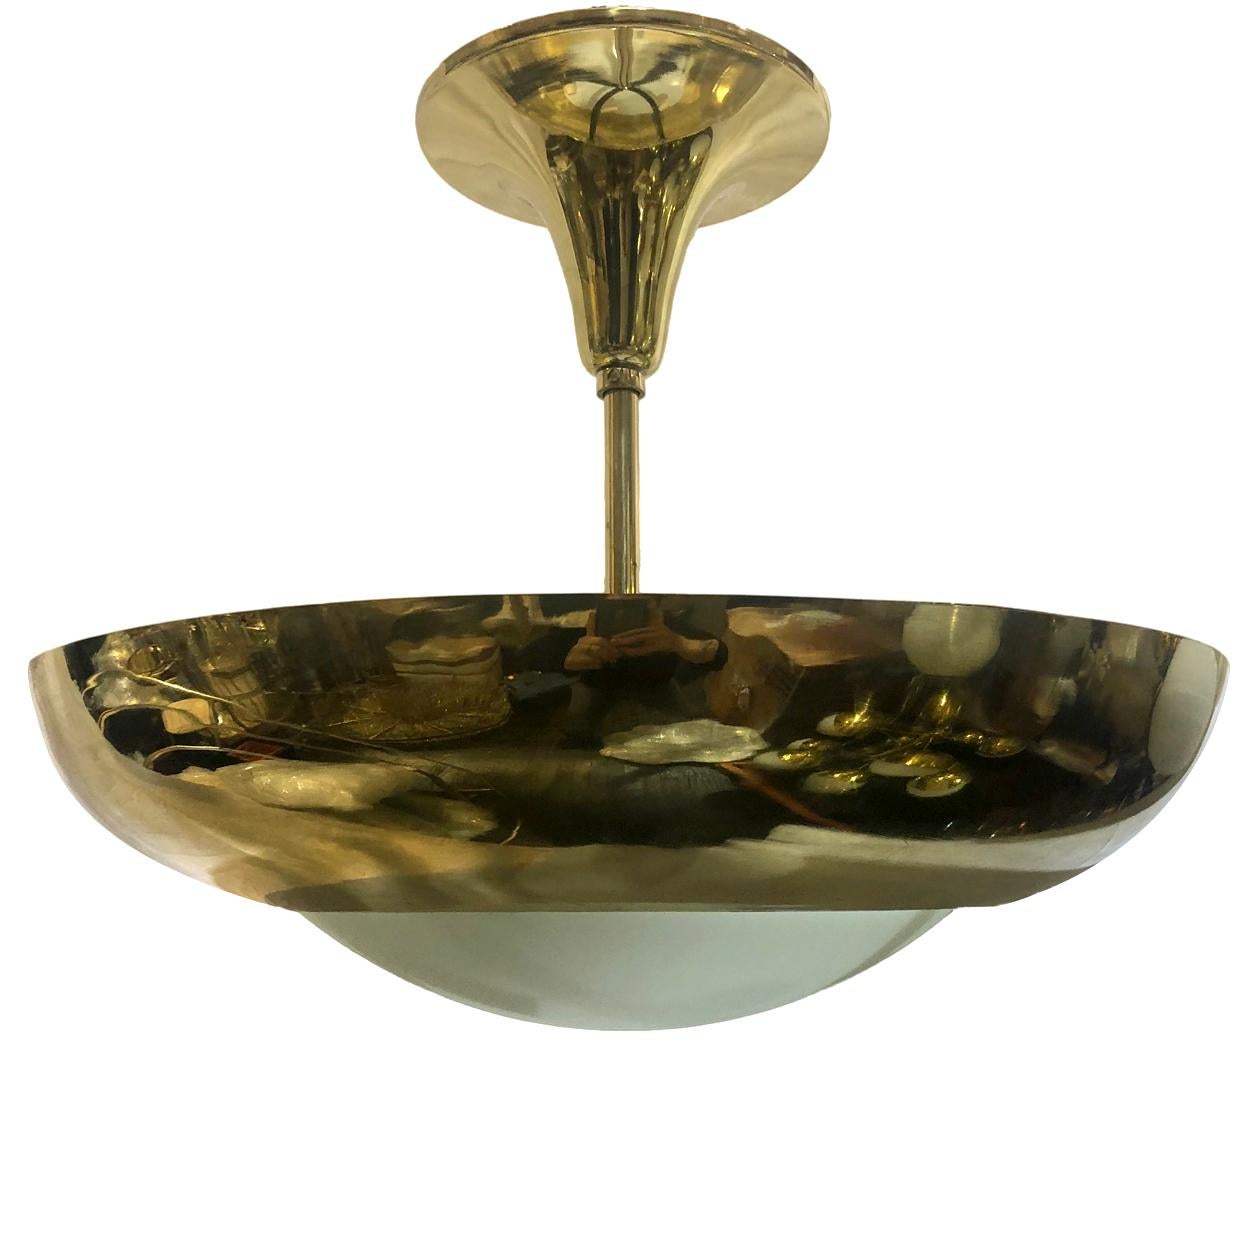 Set of six French circa 1960's polished bronze light fixtures with milk glass insets. Sold individually.

Measurements:
Diameter: 20